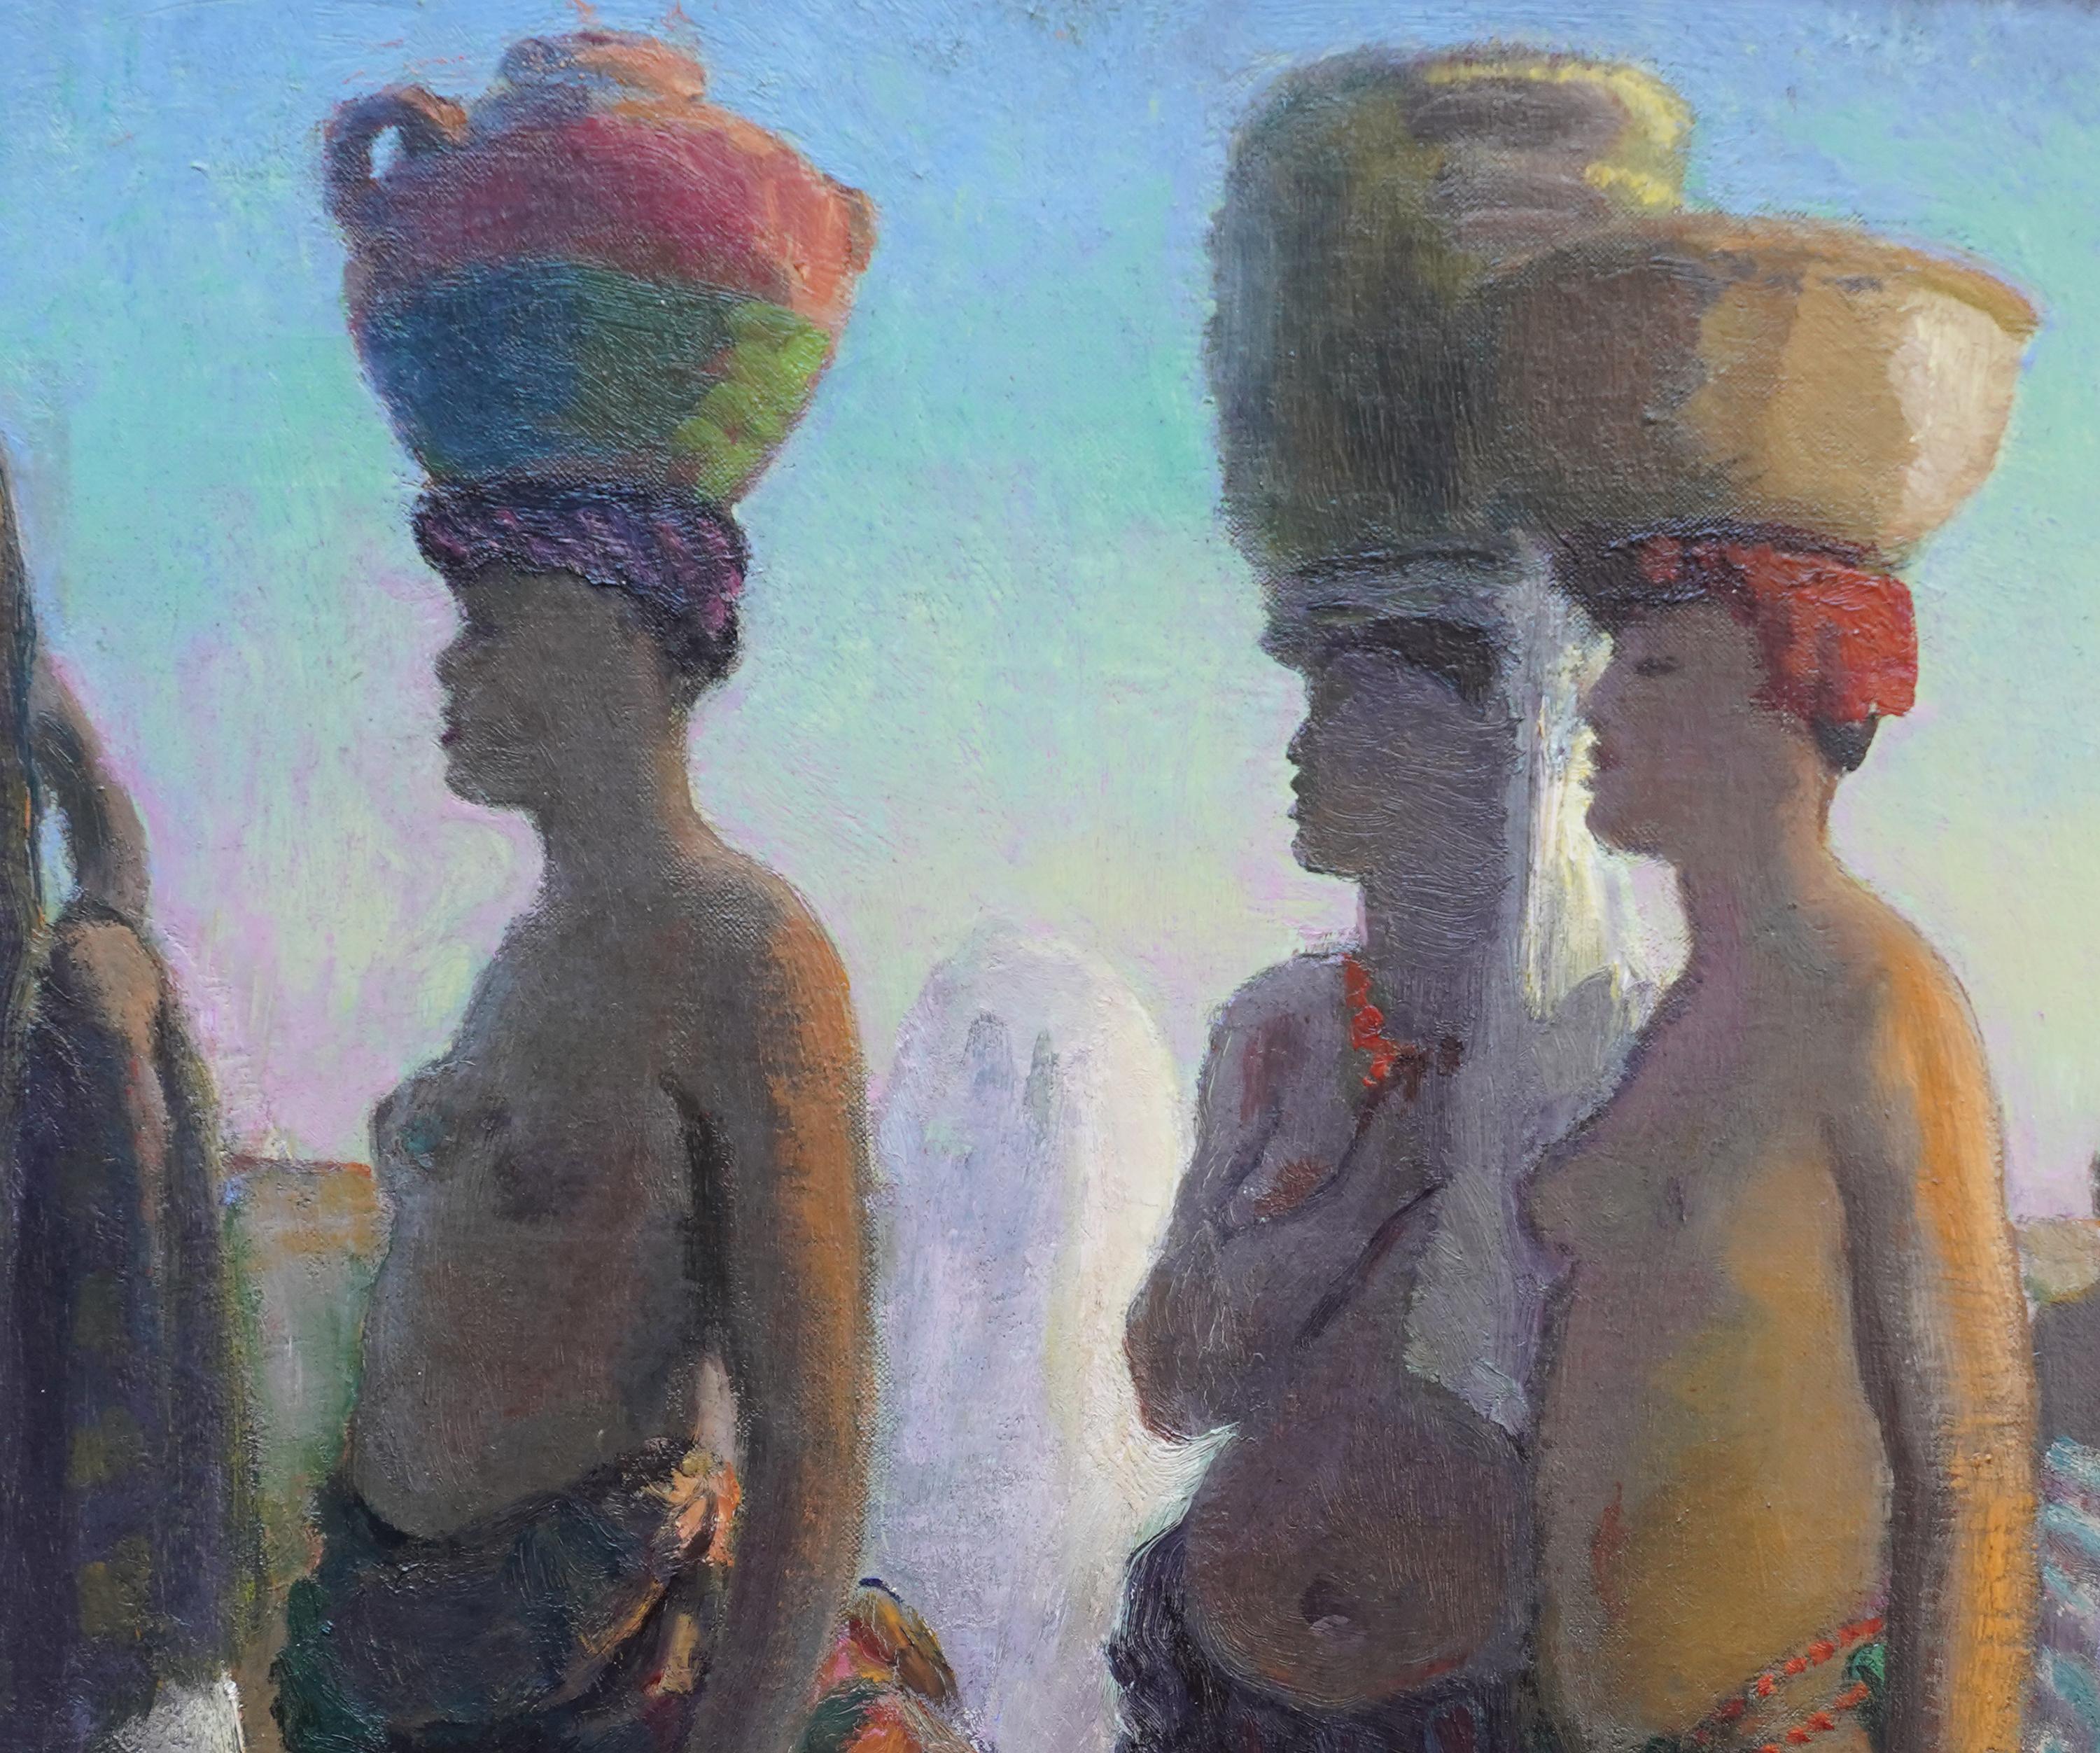 Portrait of Water Bearers, Africa - British 1920's Orientalist art oil painting - Gray Figurative Painting by Spencer Pryse